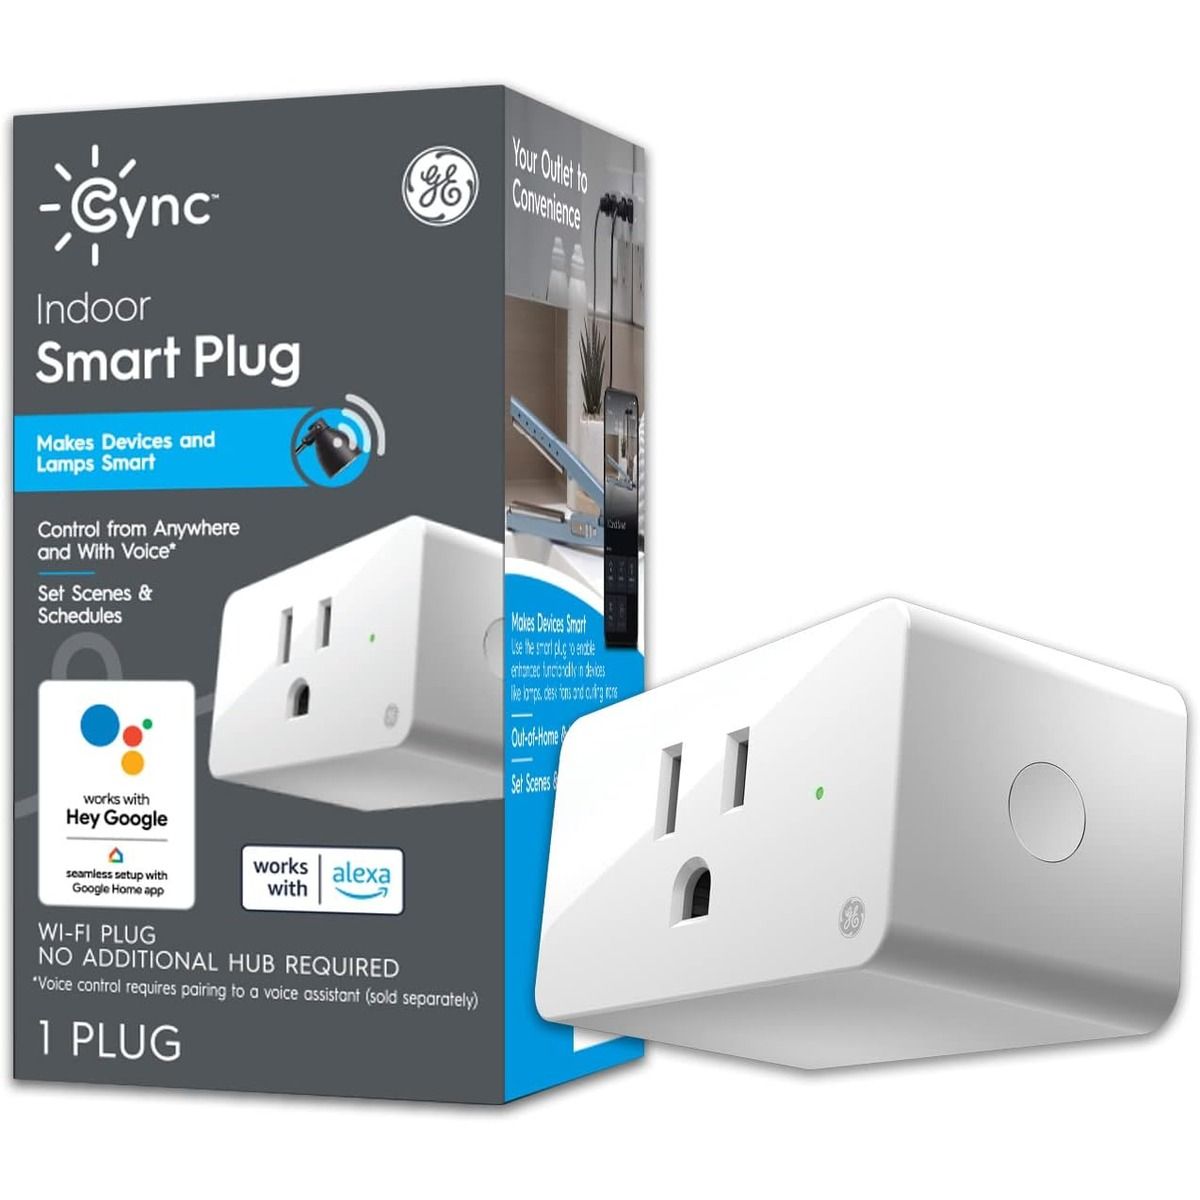 The Ge Cync Smart Plug against a white background